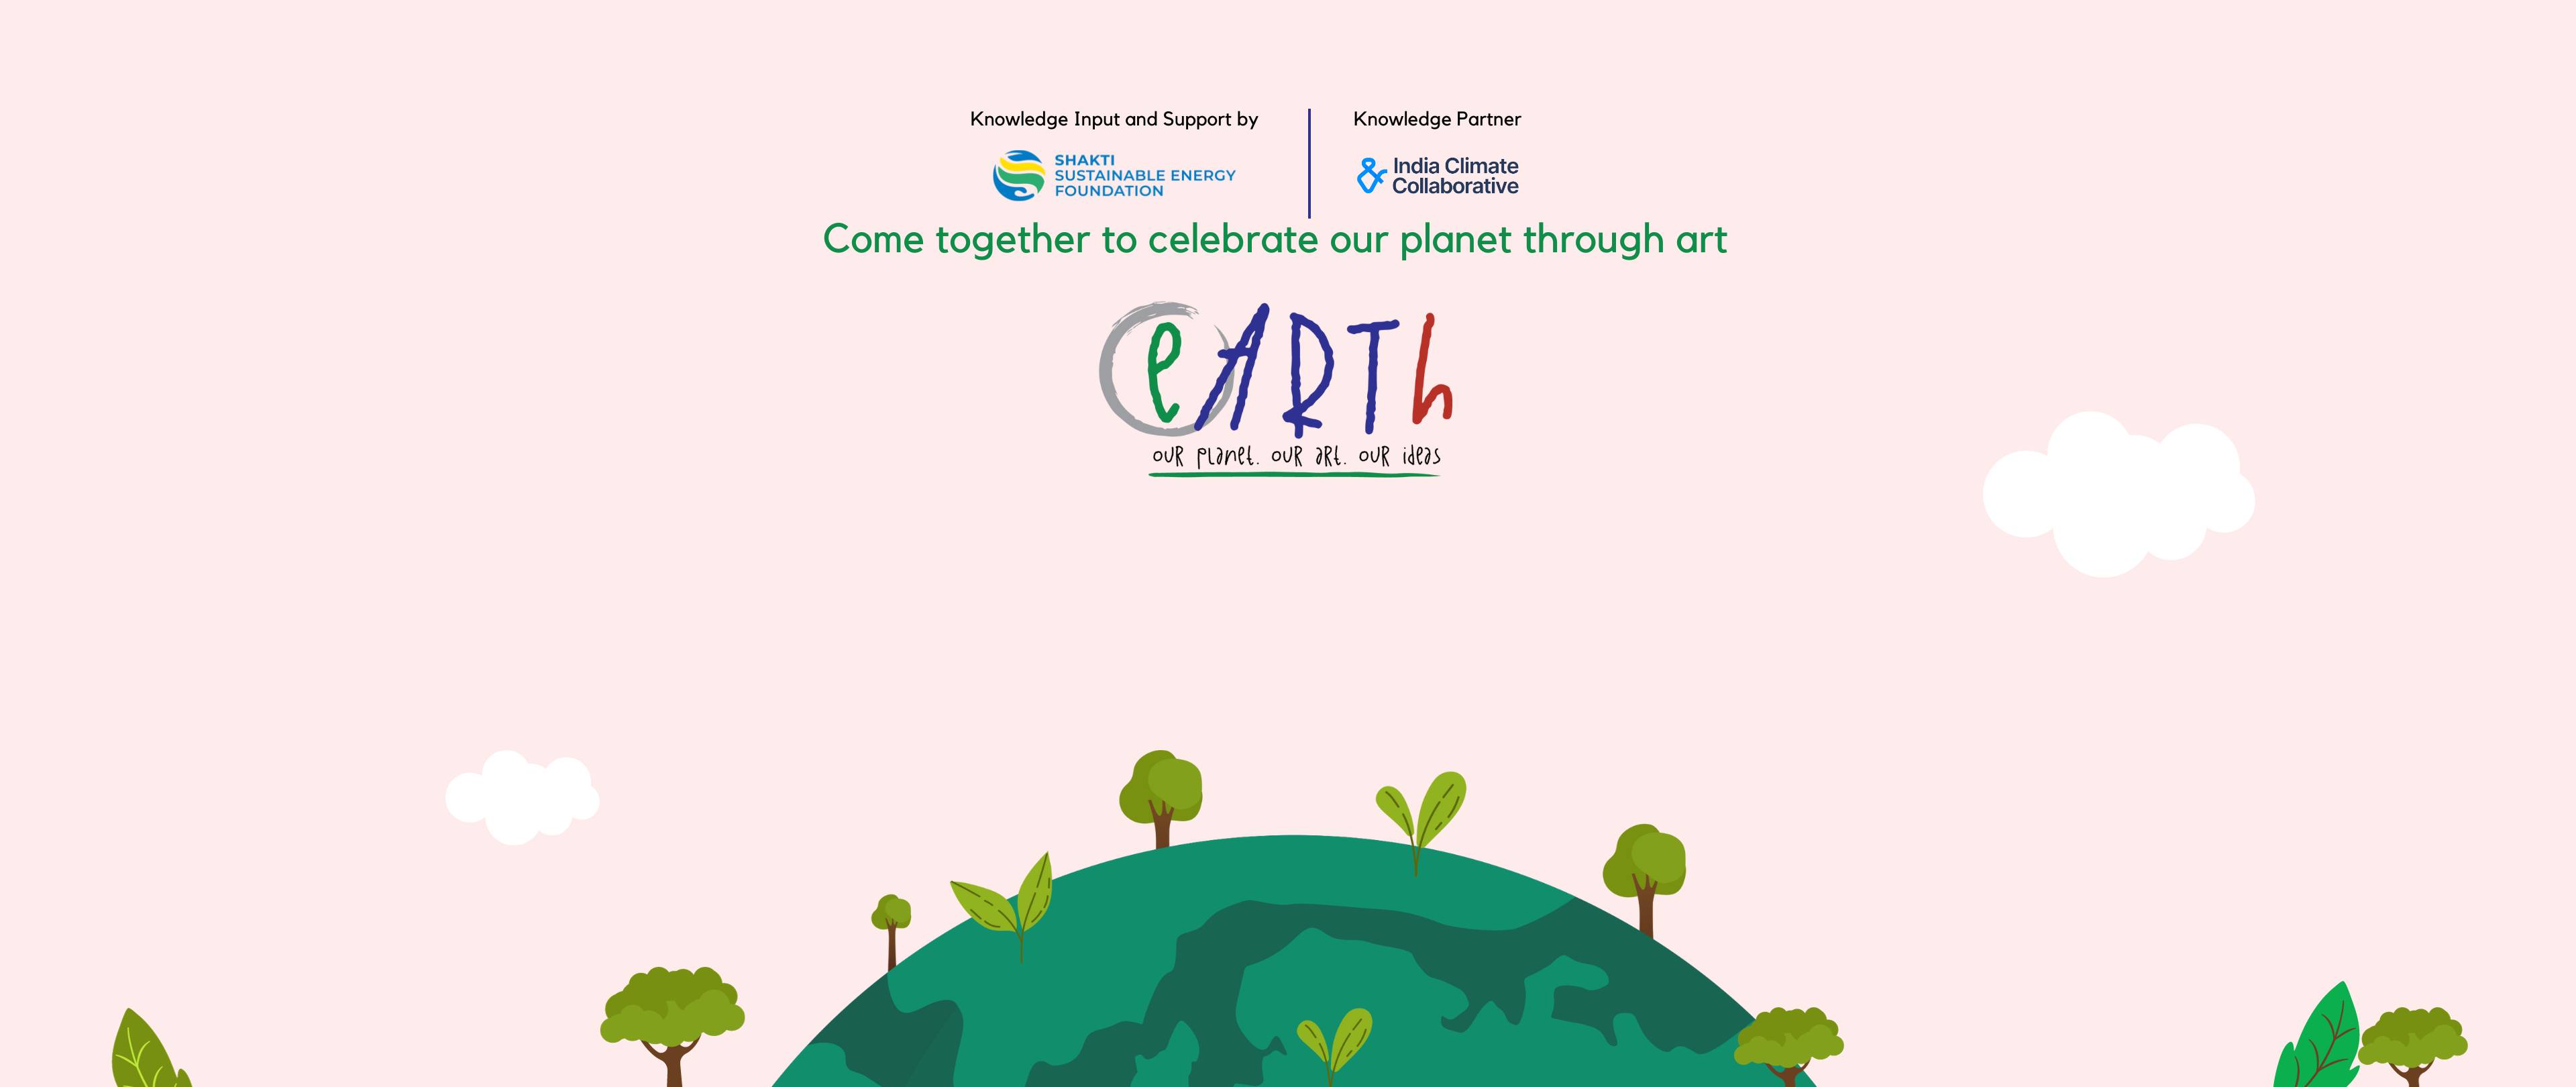 eARTh: Our planet, Our art, Our ideas